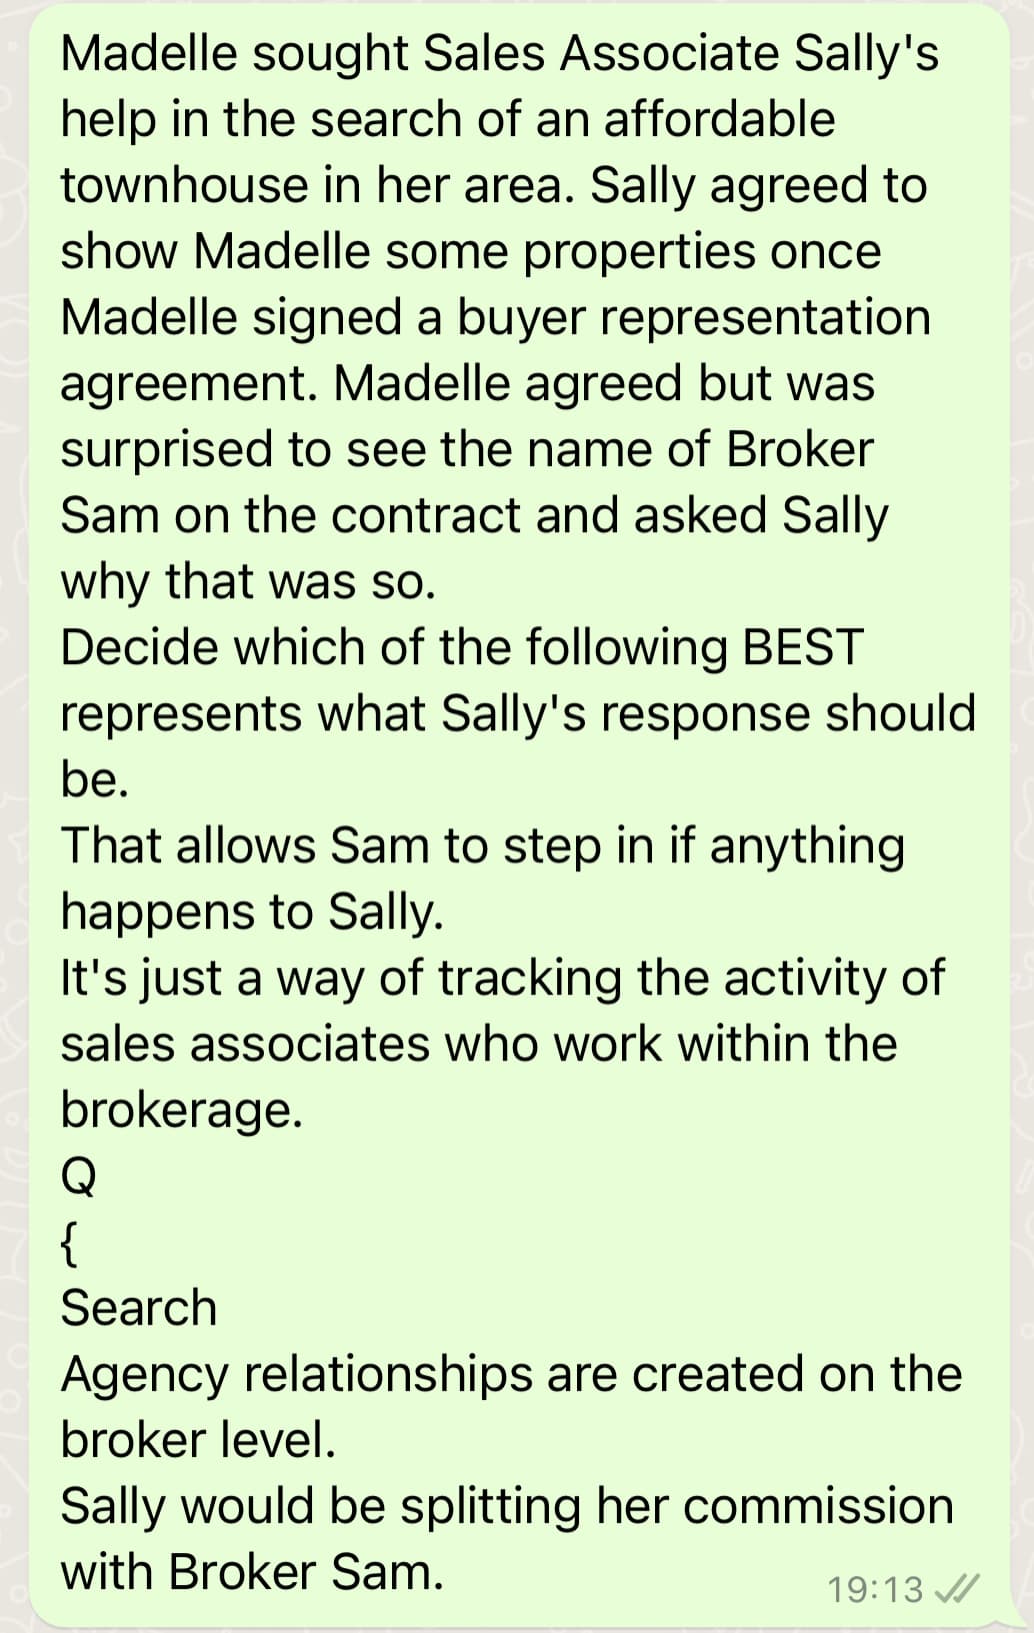 Madelle sought Sales Associate Sally's
help in the search of an affordable
townhouse in her area. Sally agreed to
show Madelle some properties once
Madelle signed a buyer representation
agreement. Madelle agreed but was
surprised to see the name of Broker
Sam on the contract and asked Sally
why that was so.
Decide which of the following BEST
represents what Sally's response should
be.
That allows Sam to step in if anything
happens to Sally.
It's just a way of tracking the activity of
sales associates who work within the
brokerage.
Q
{
Search
Agency relationships are created on the
broker level.
Sally would be splitting her commission
with Broker Sam.
19:13